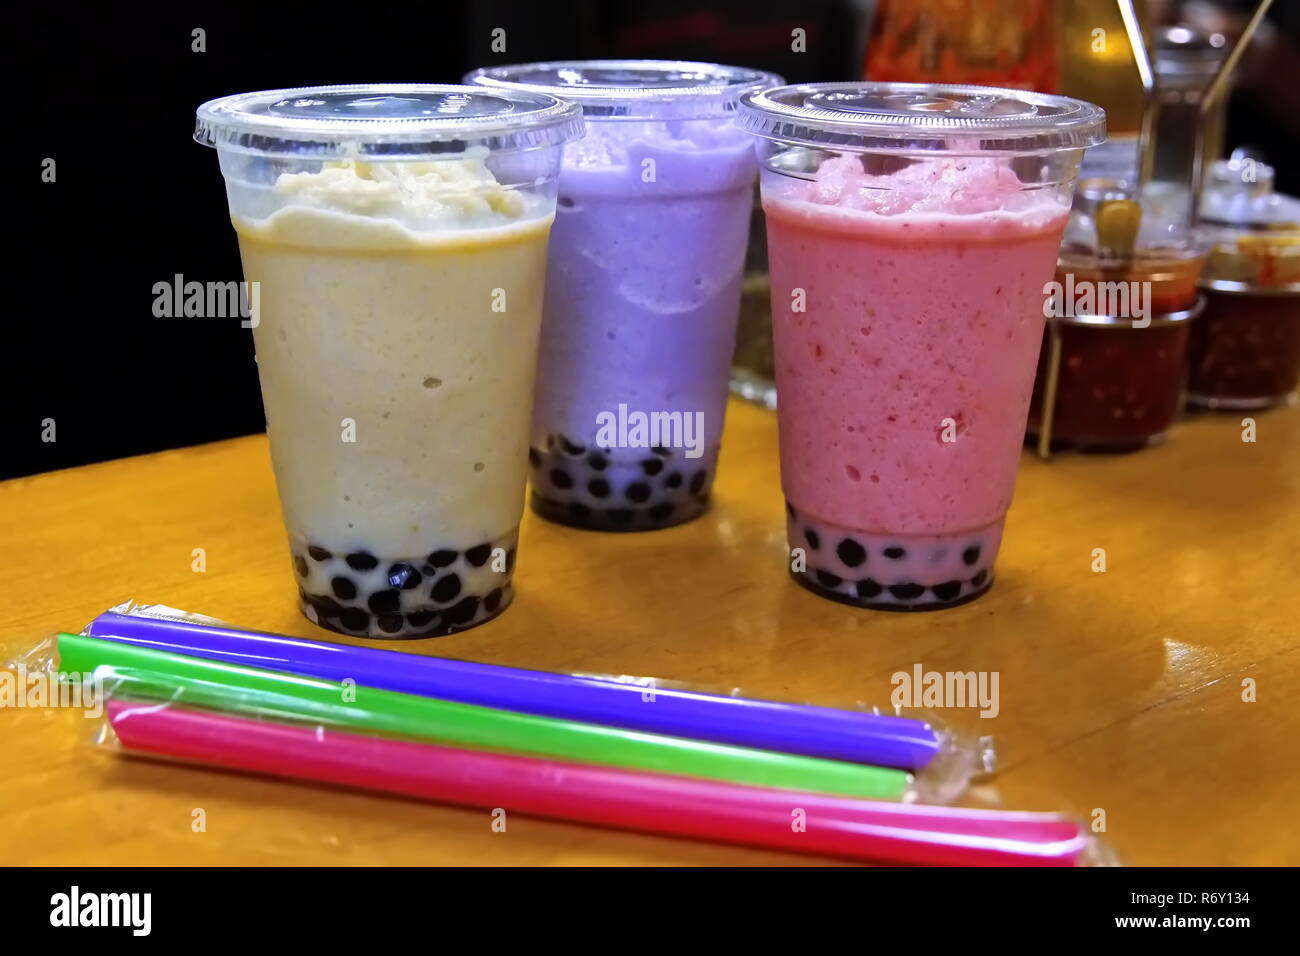 https://c8.alamy.com/comp/R6Y134/bubble-tea-also-pearl-milk-tea-bubble-milk-tea-or-simply-boba-came-from-taiwan-in-the-80s%60-they-contain-flavors-of-tea-milk-as-well-as-sugar-sha-R6Y134.jpg